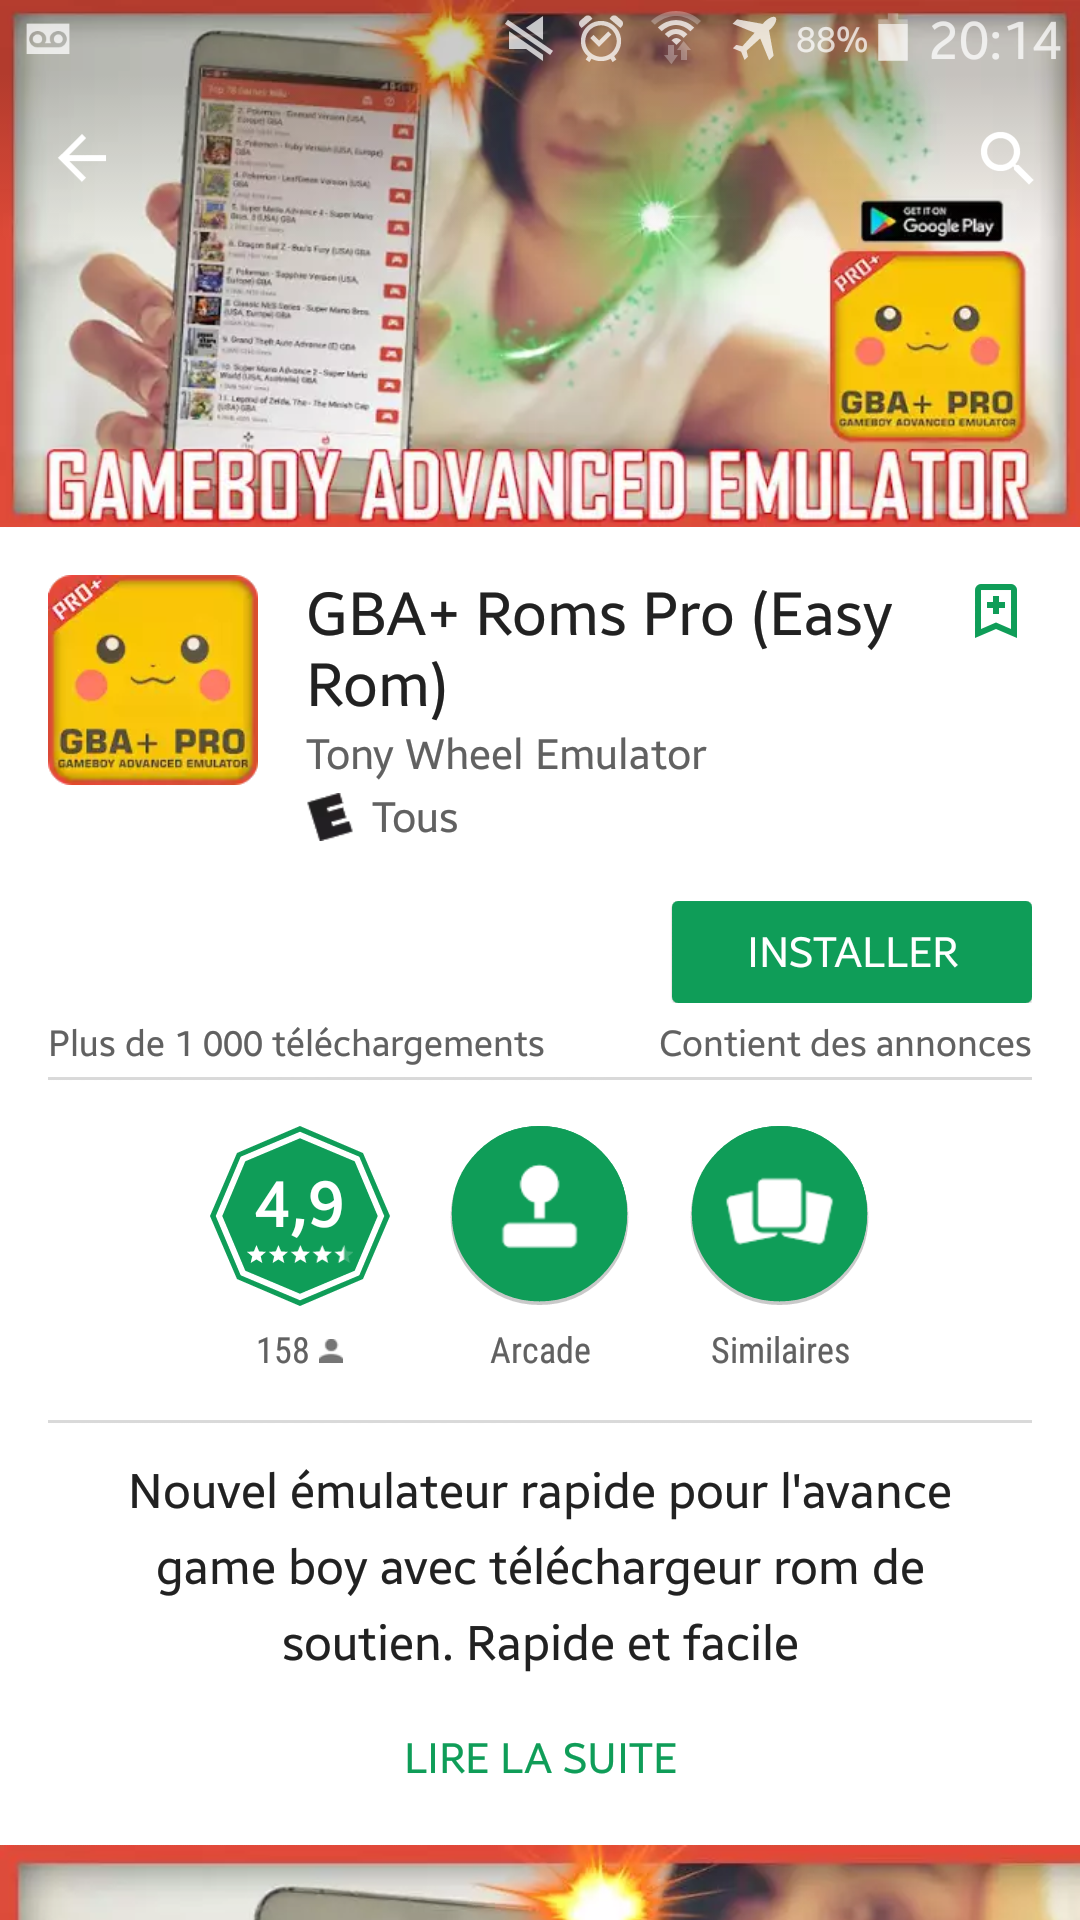 gba+pro.png